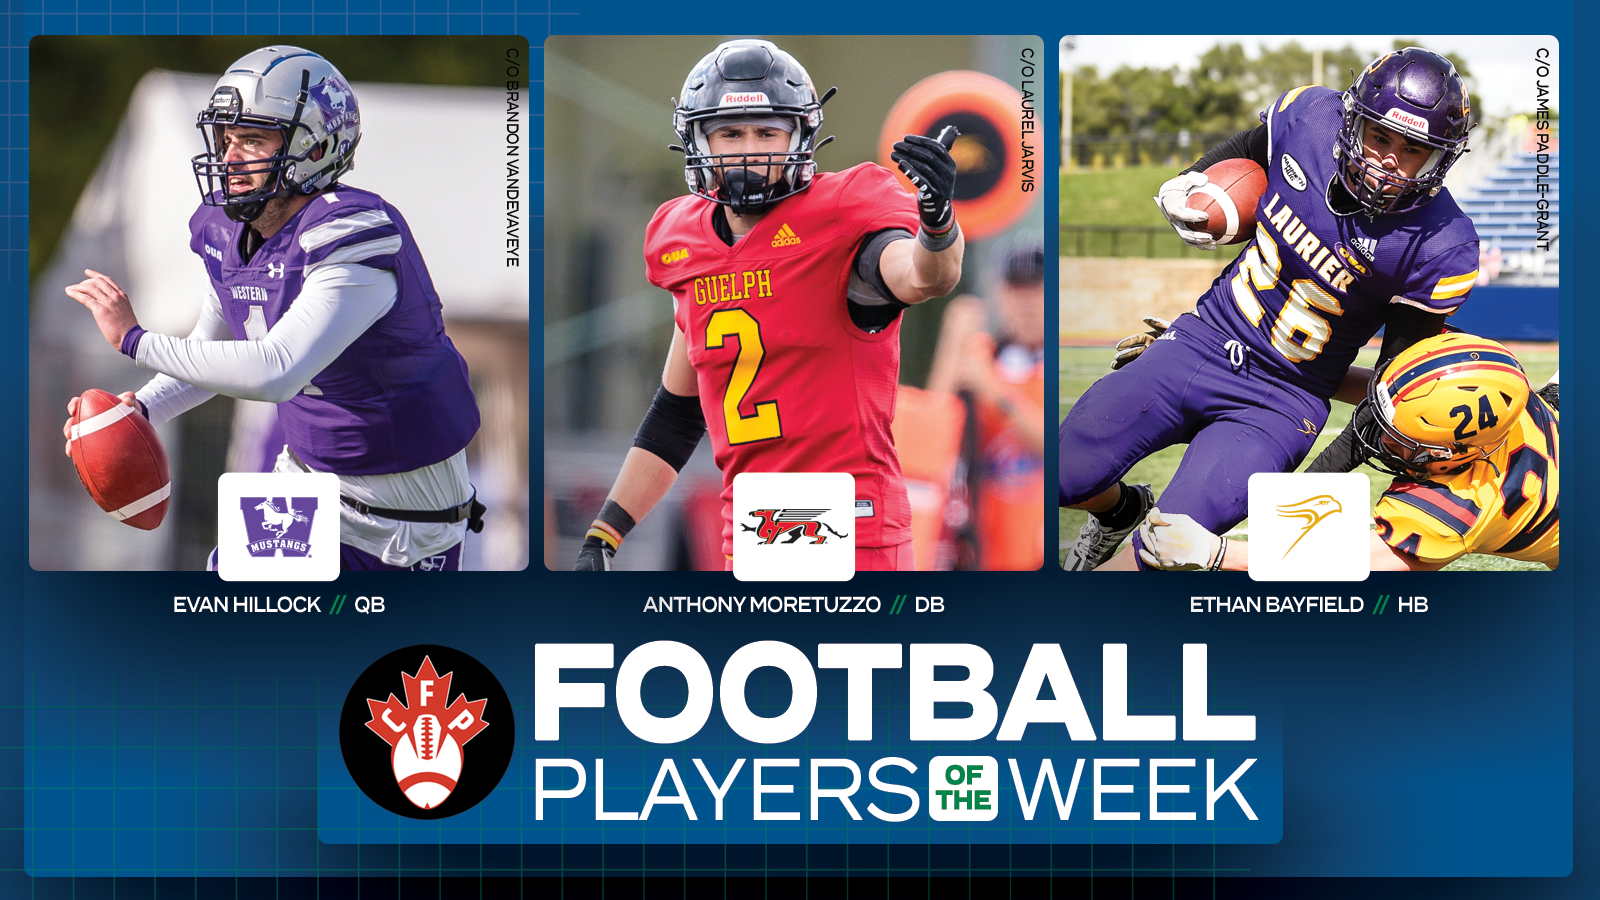 Graphic on predominantly blue background featuring action photos of Evan Hillock, Anthony Moretuzzo, and Ethan Bayfield, along with Canadian Football Perspective logo and white text that reads 'Football Players of the Week'